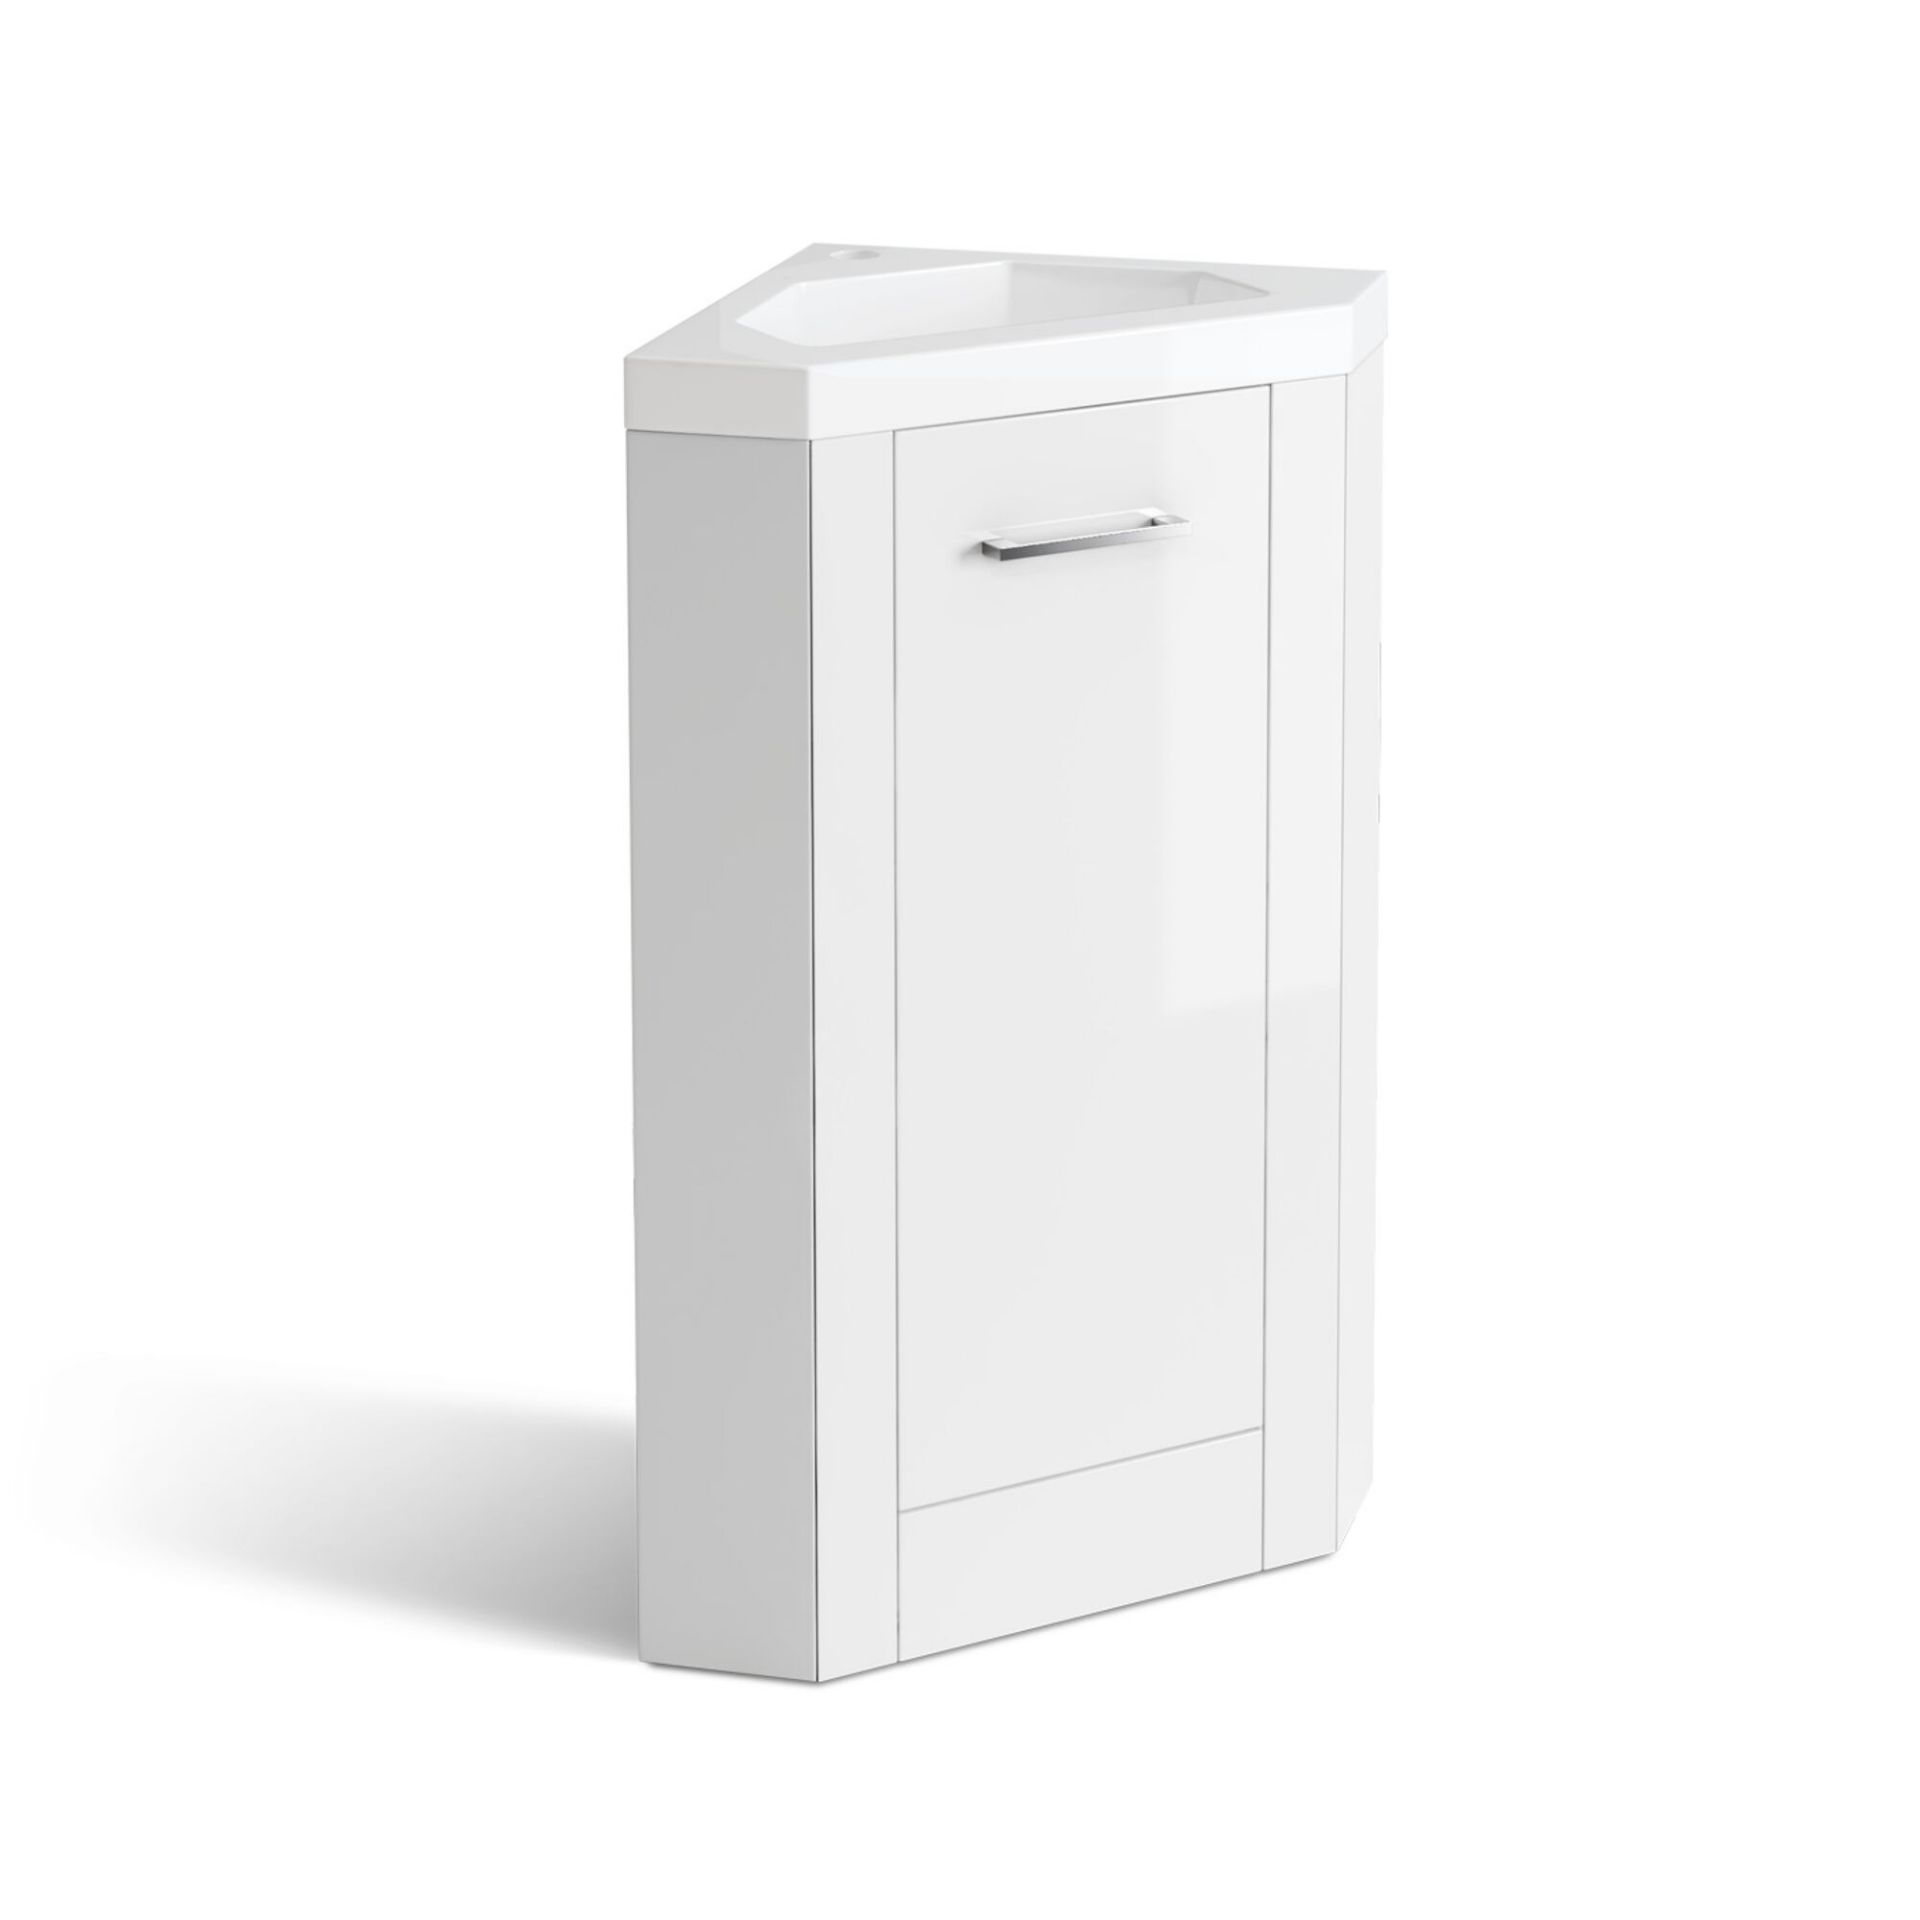 (OS12) 800x560mm Avon Corner Unit. COMES COMPLETE WITH BASIN. Convenient, space saving corner - Image 2 of 5